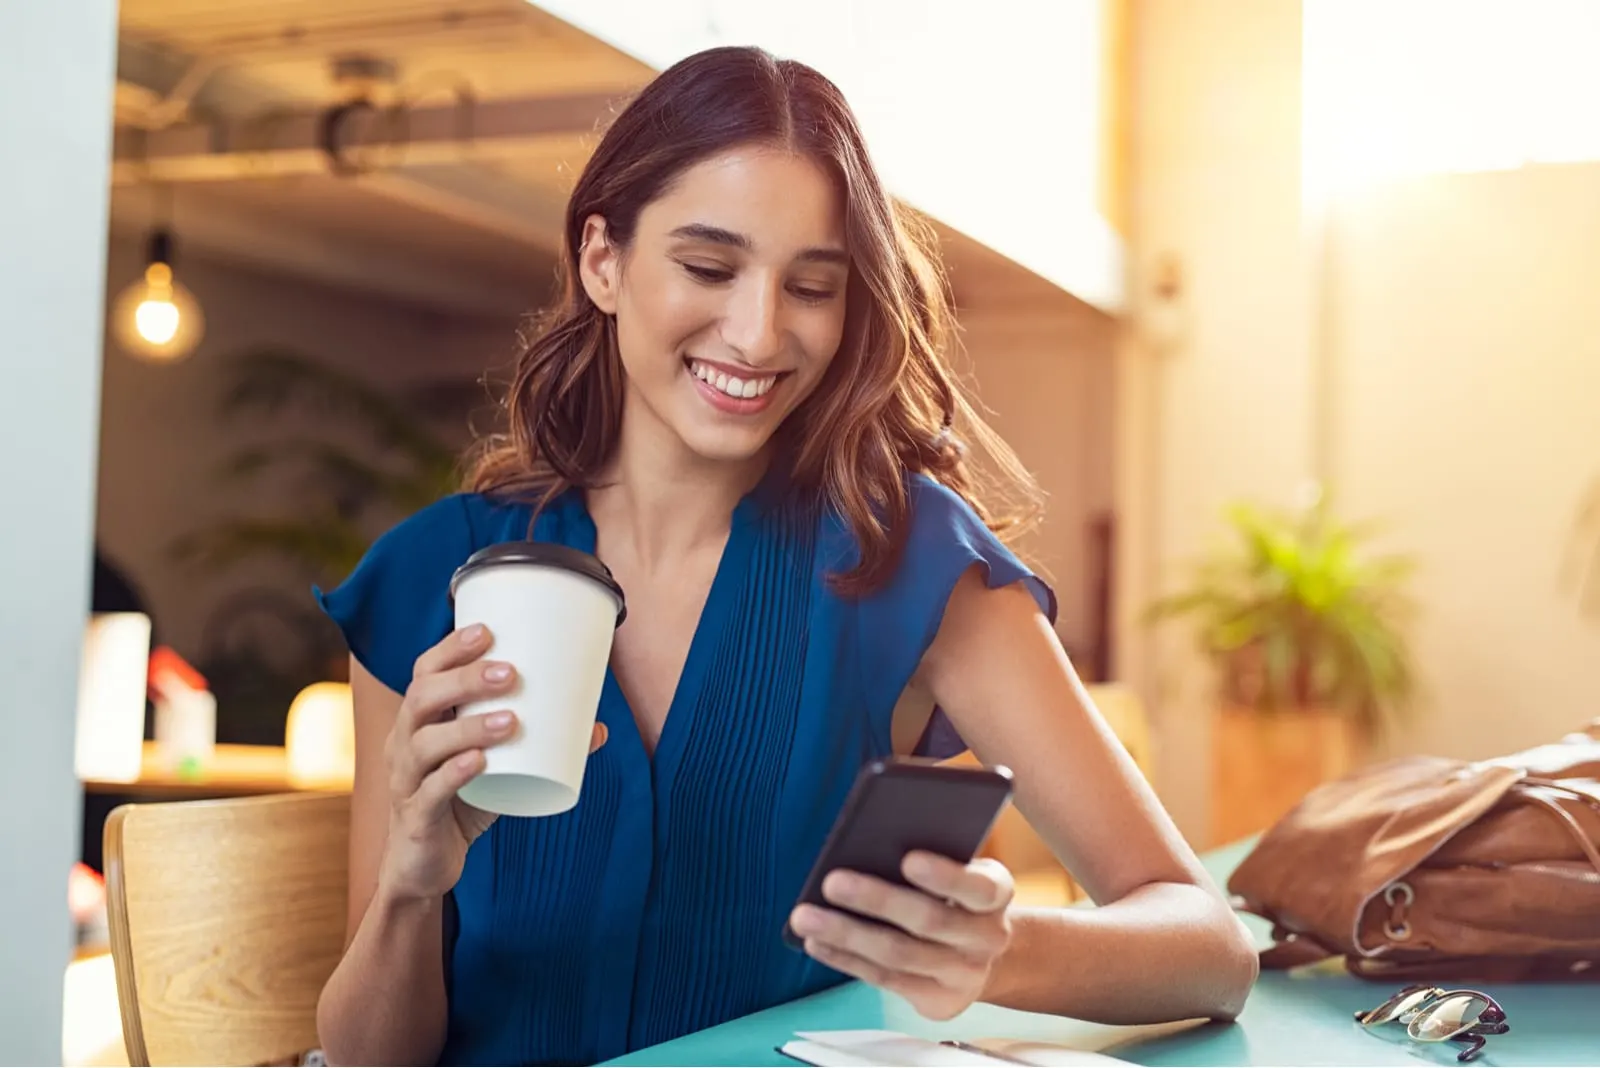 woman sitting drinking coffee and key on the phone